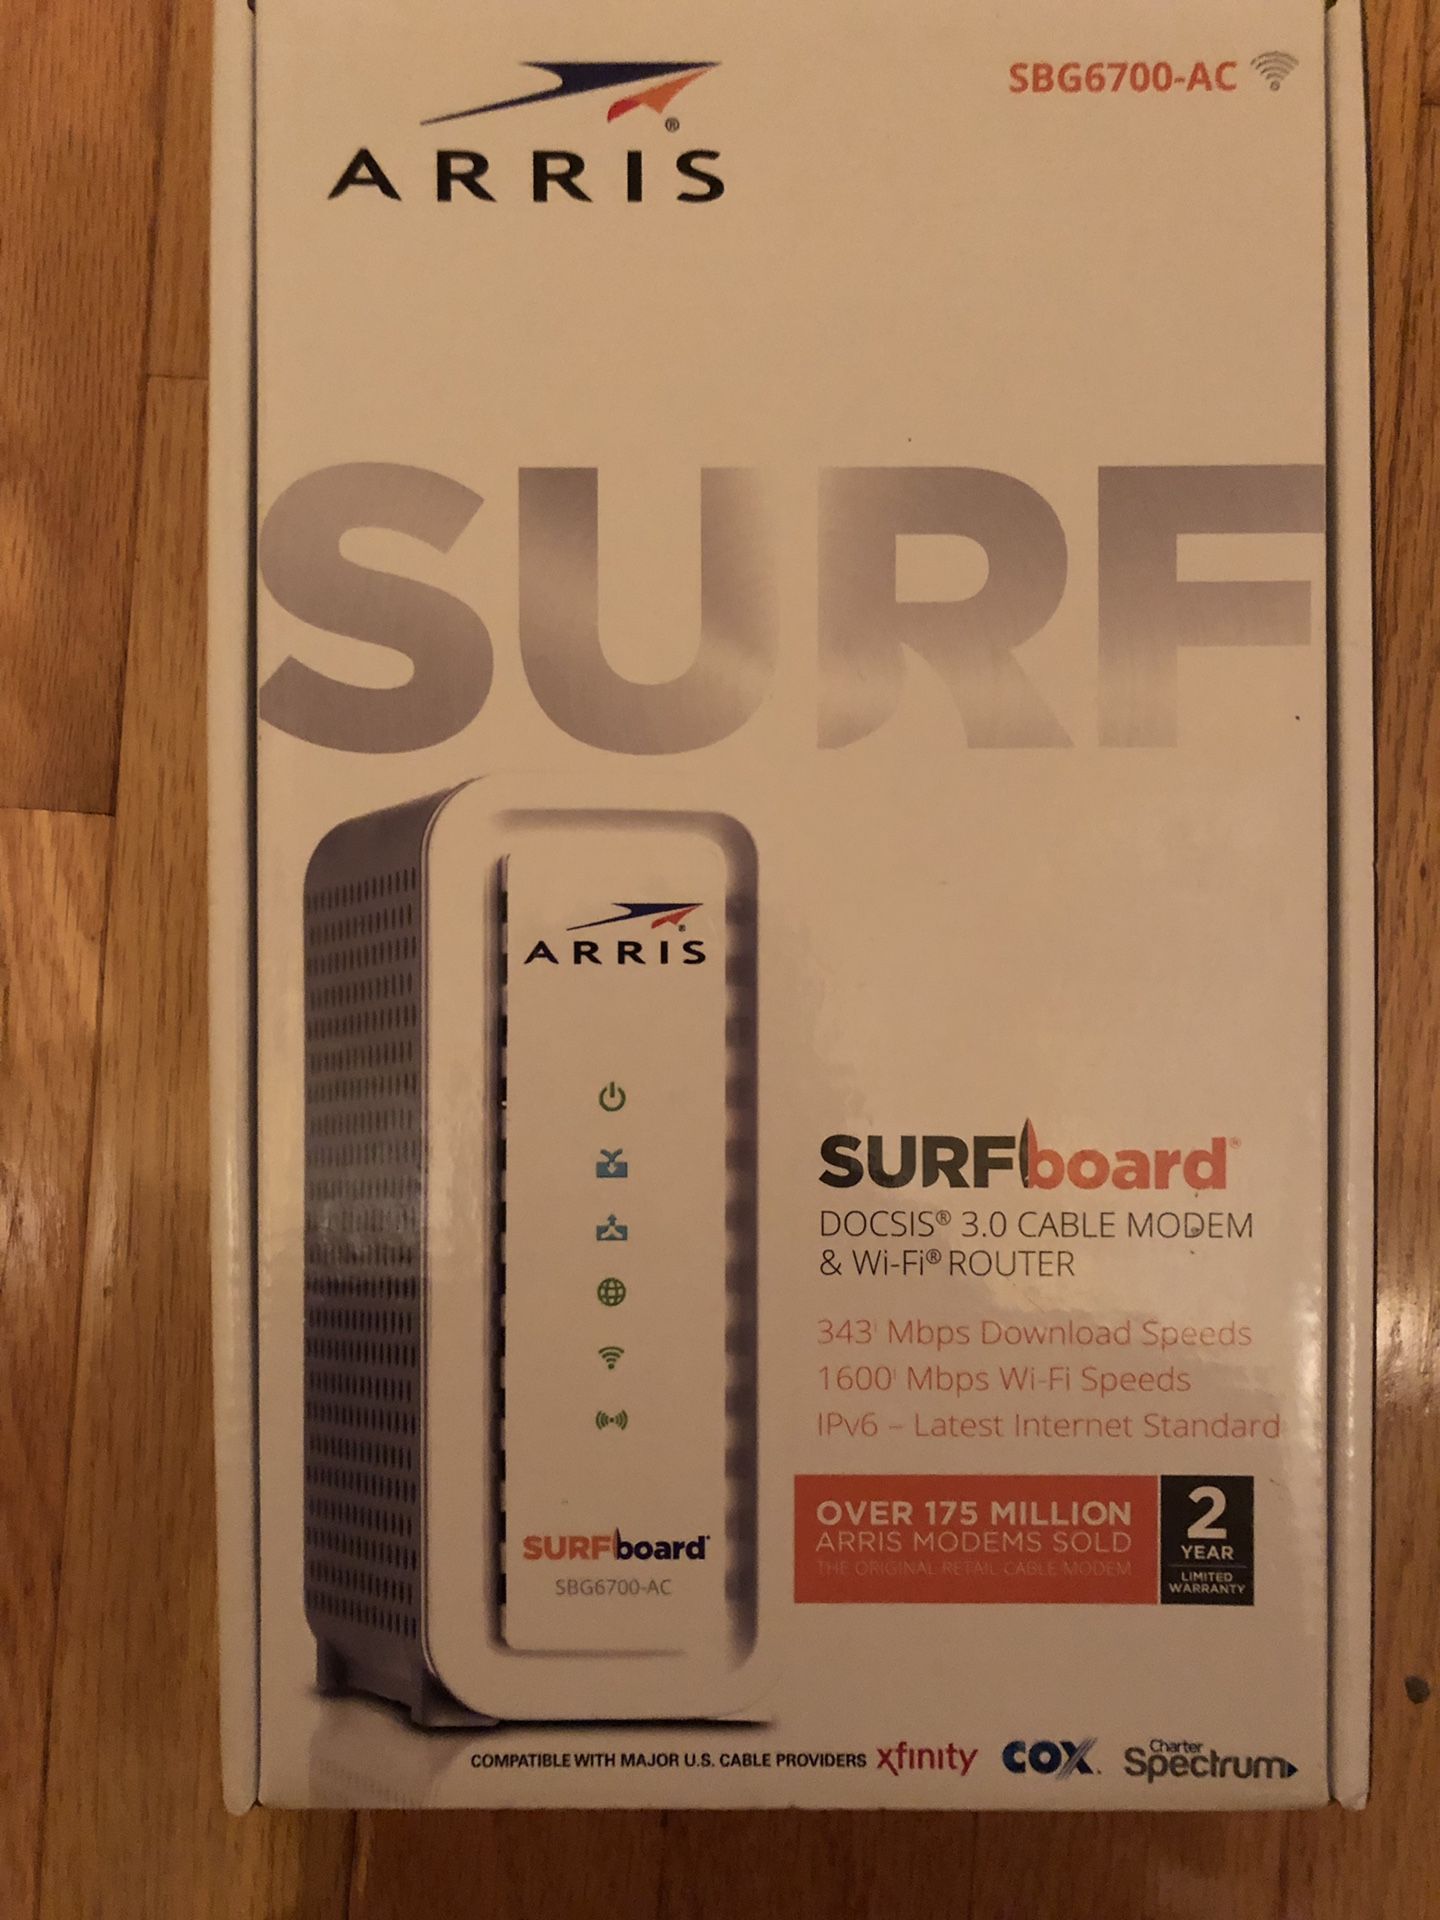 New Arris Surfboard SBG6700-AC Docsis 3.0 Cable Modem & WiFi Router